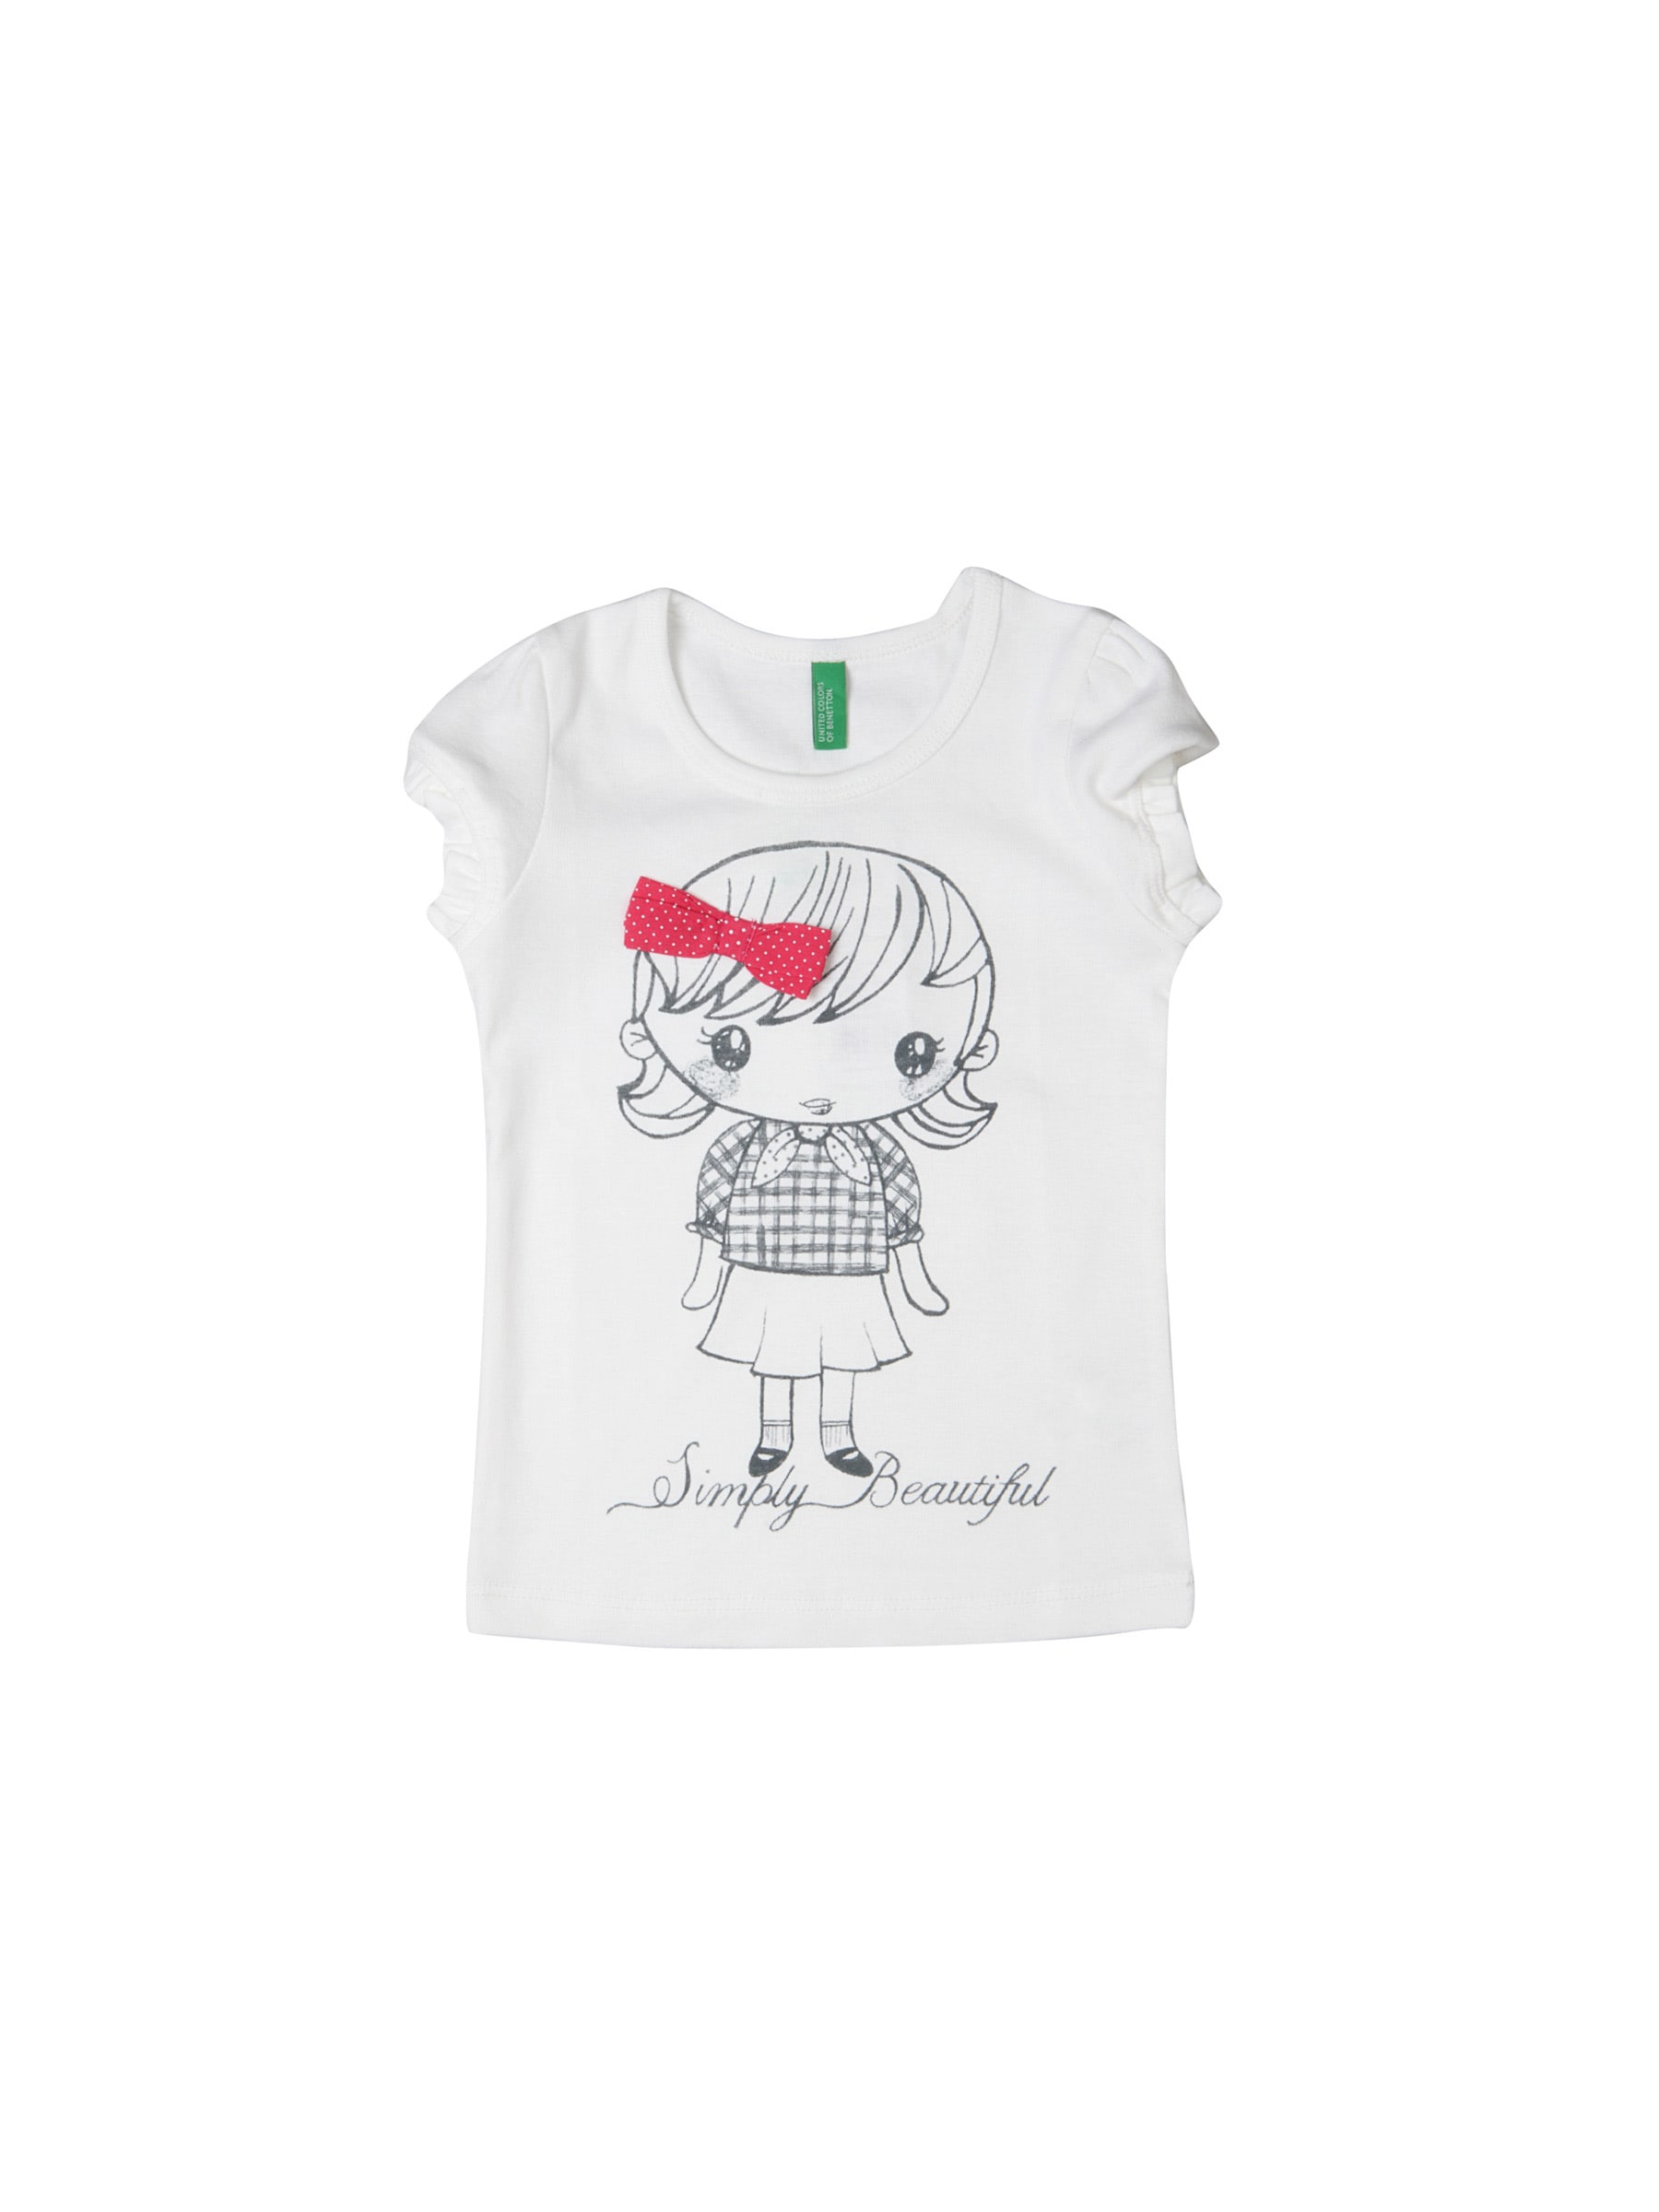 United Colors of Benetton Kids Girls White Printed Top